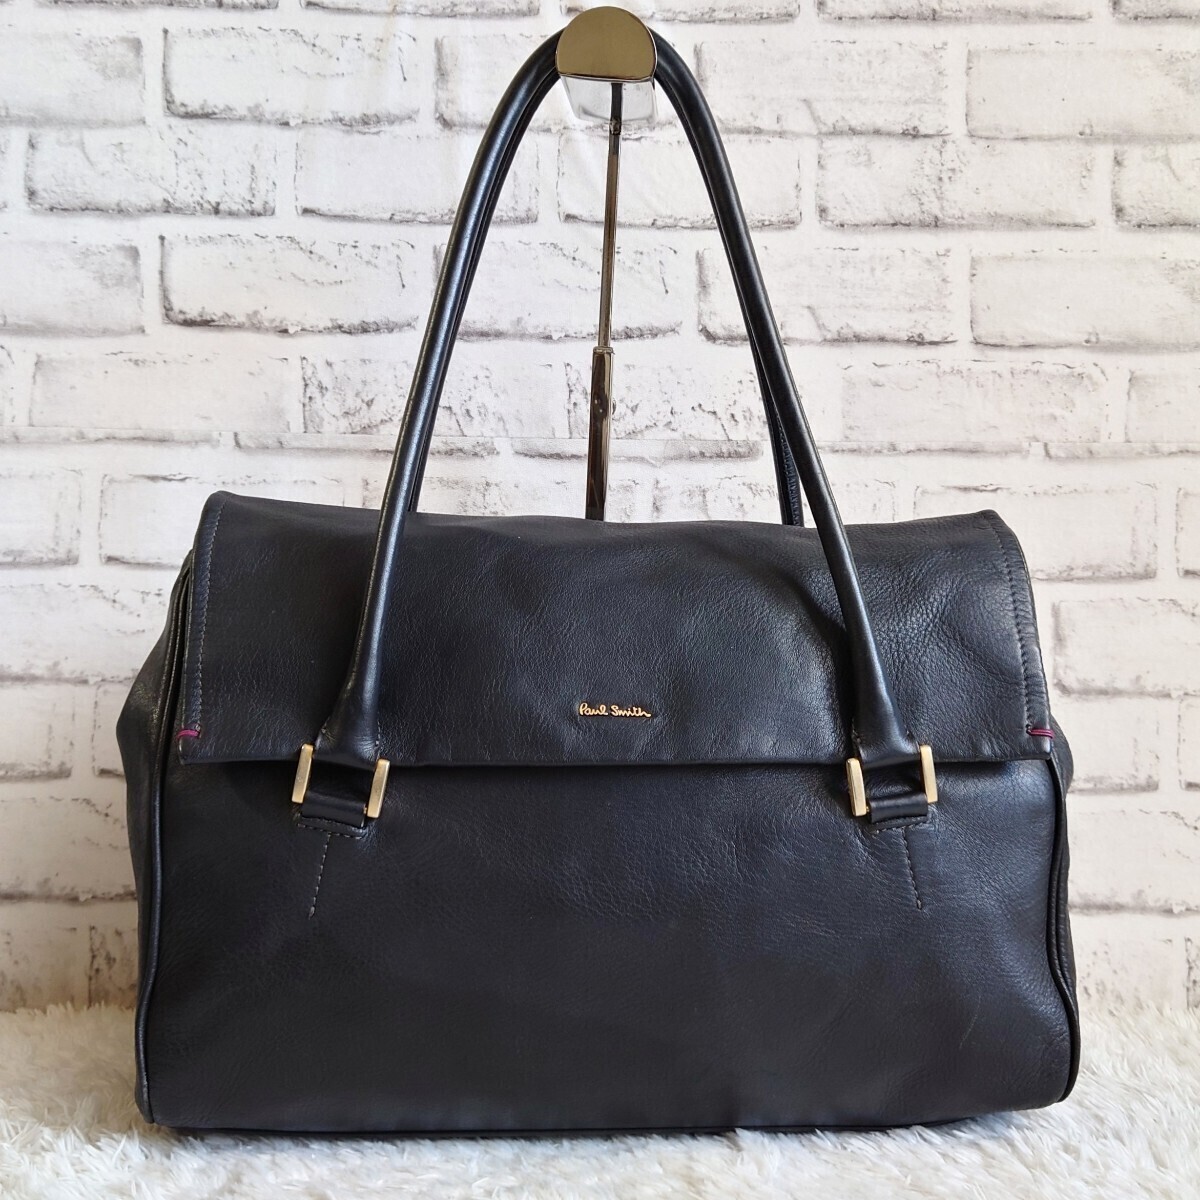  close year of model Paul Smith Paul Smith tote bag shoulder ..A4 storage possibility commuting business leather leather black black Logo metal fittings Gold men's 